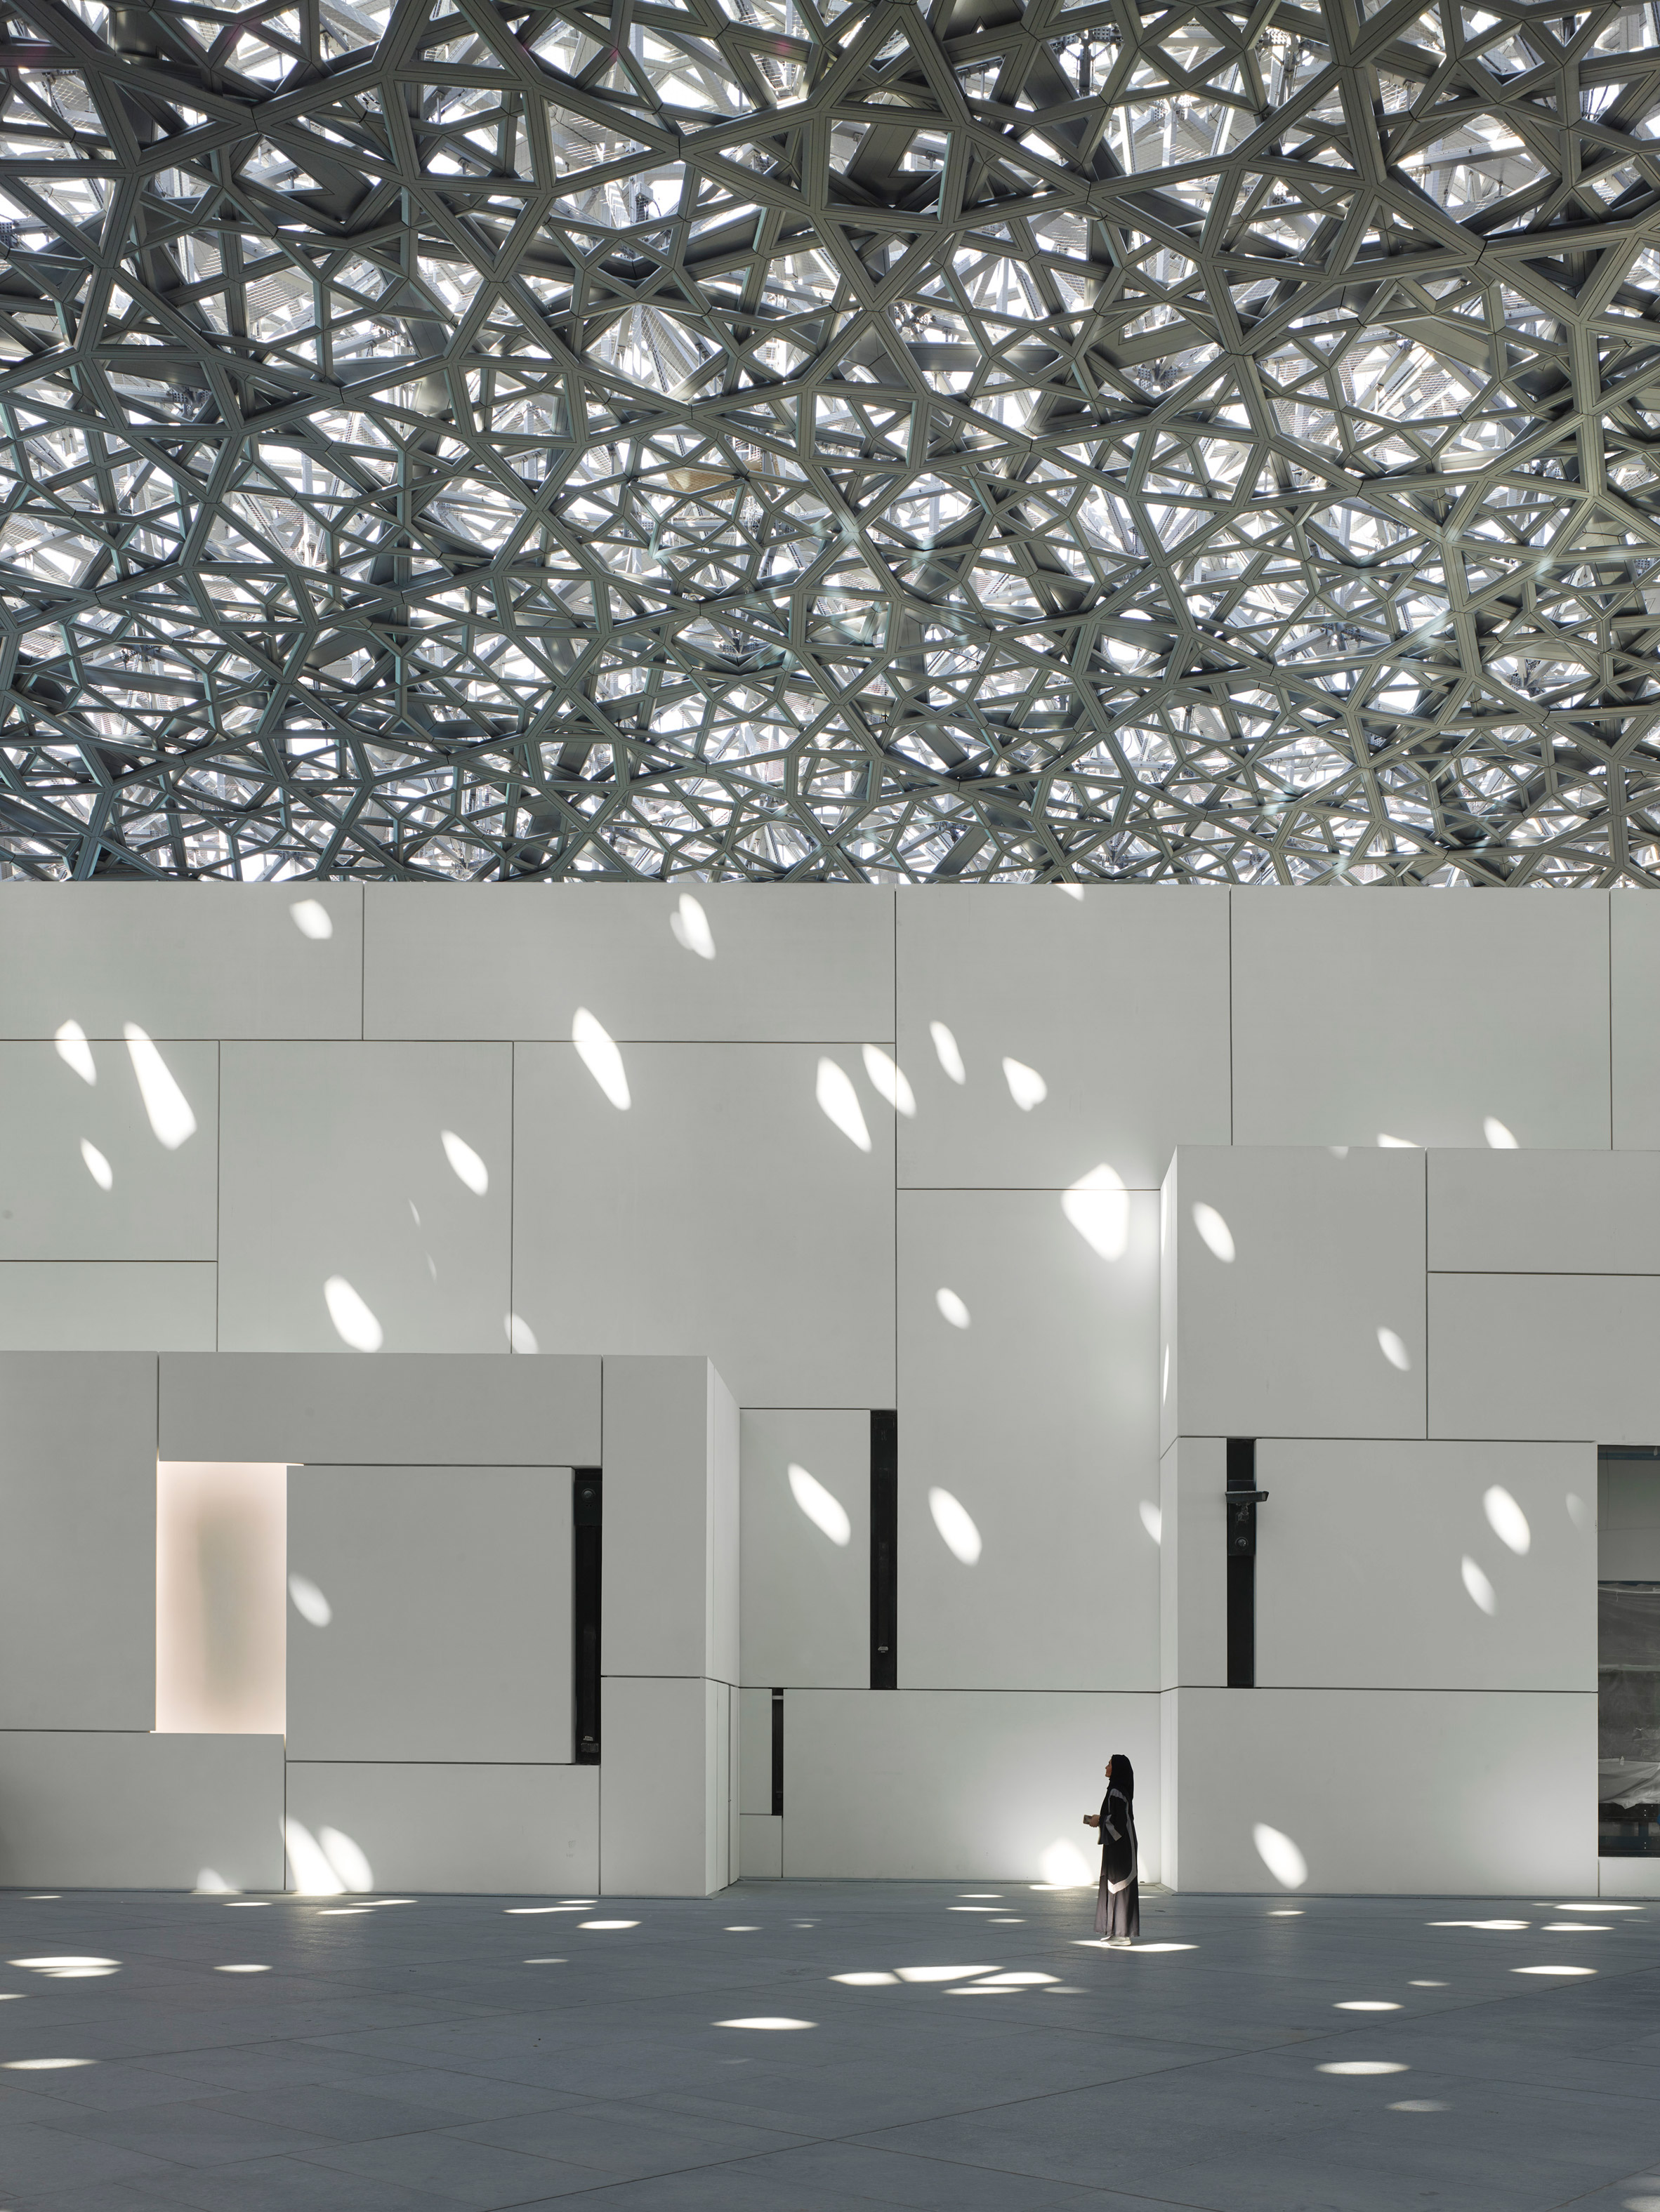 Jean Nouvel's Louvre Abu Dhabi features a huge patterned dome-9